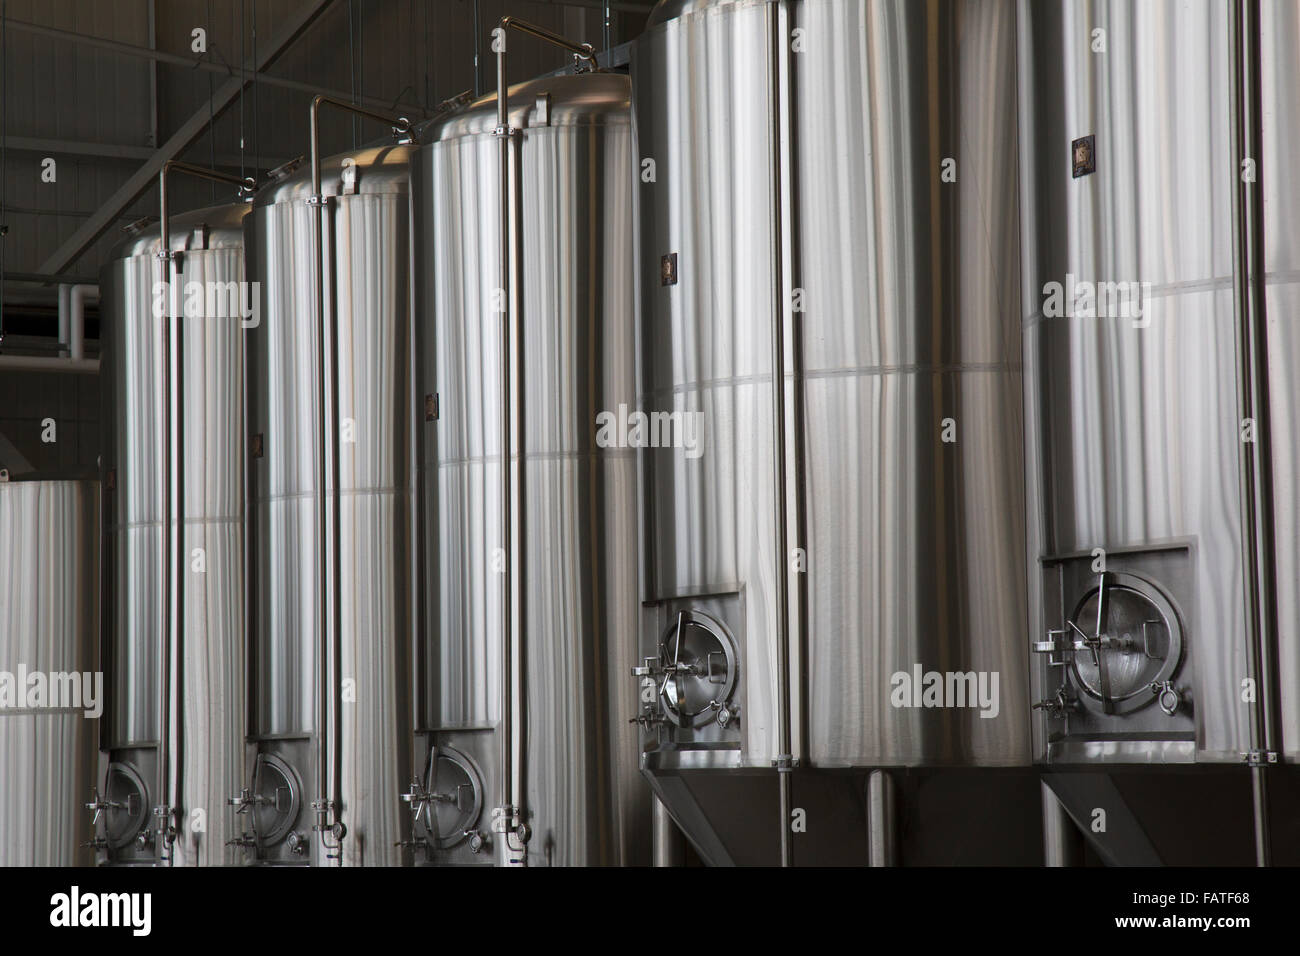 Stainless steel alcohol fermentation tanks in a brewery. Stock Photo